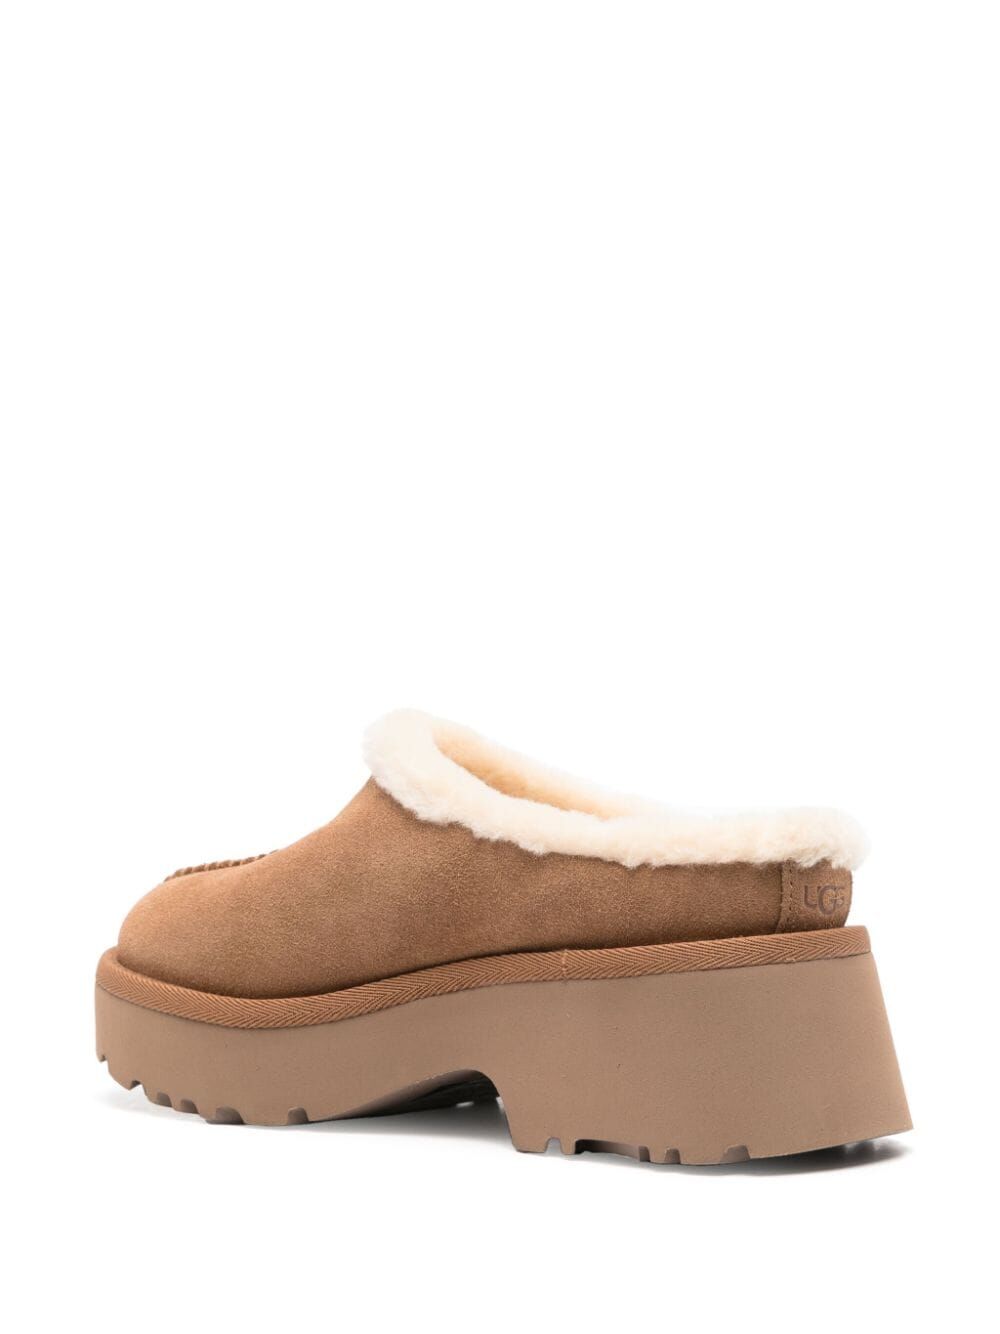 Woman New Heights Cozy Clog Shoes